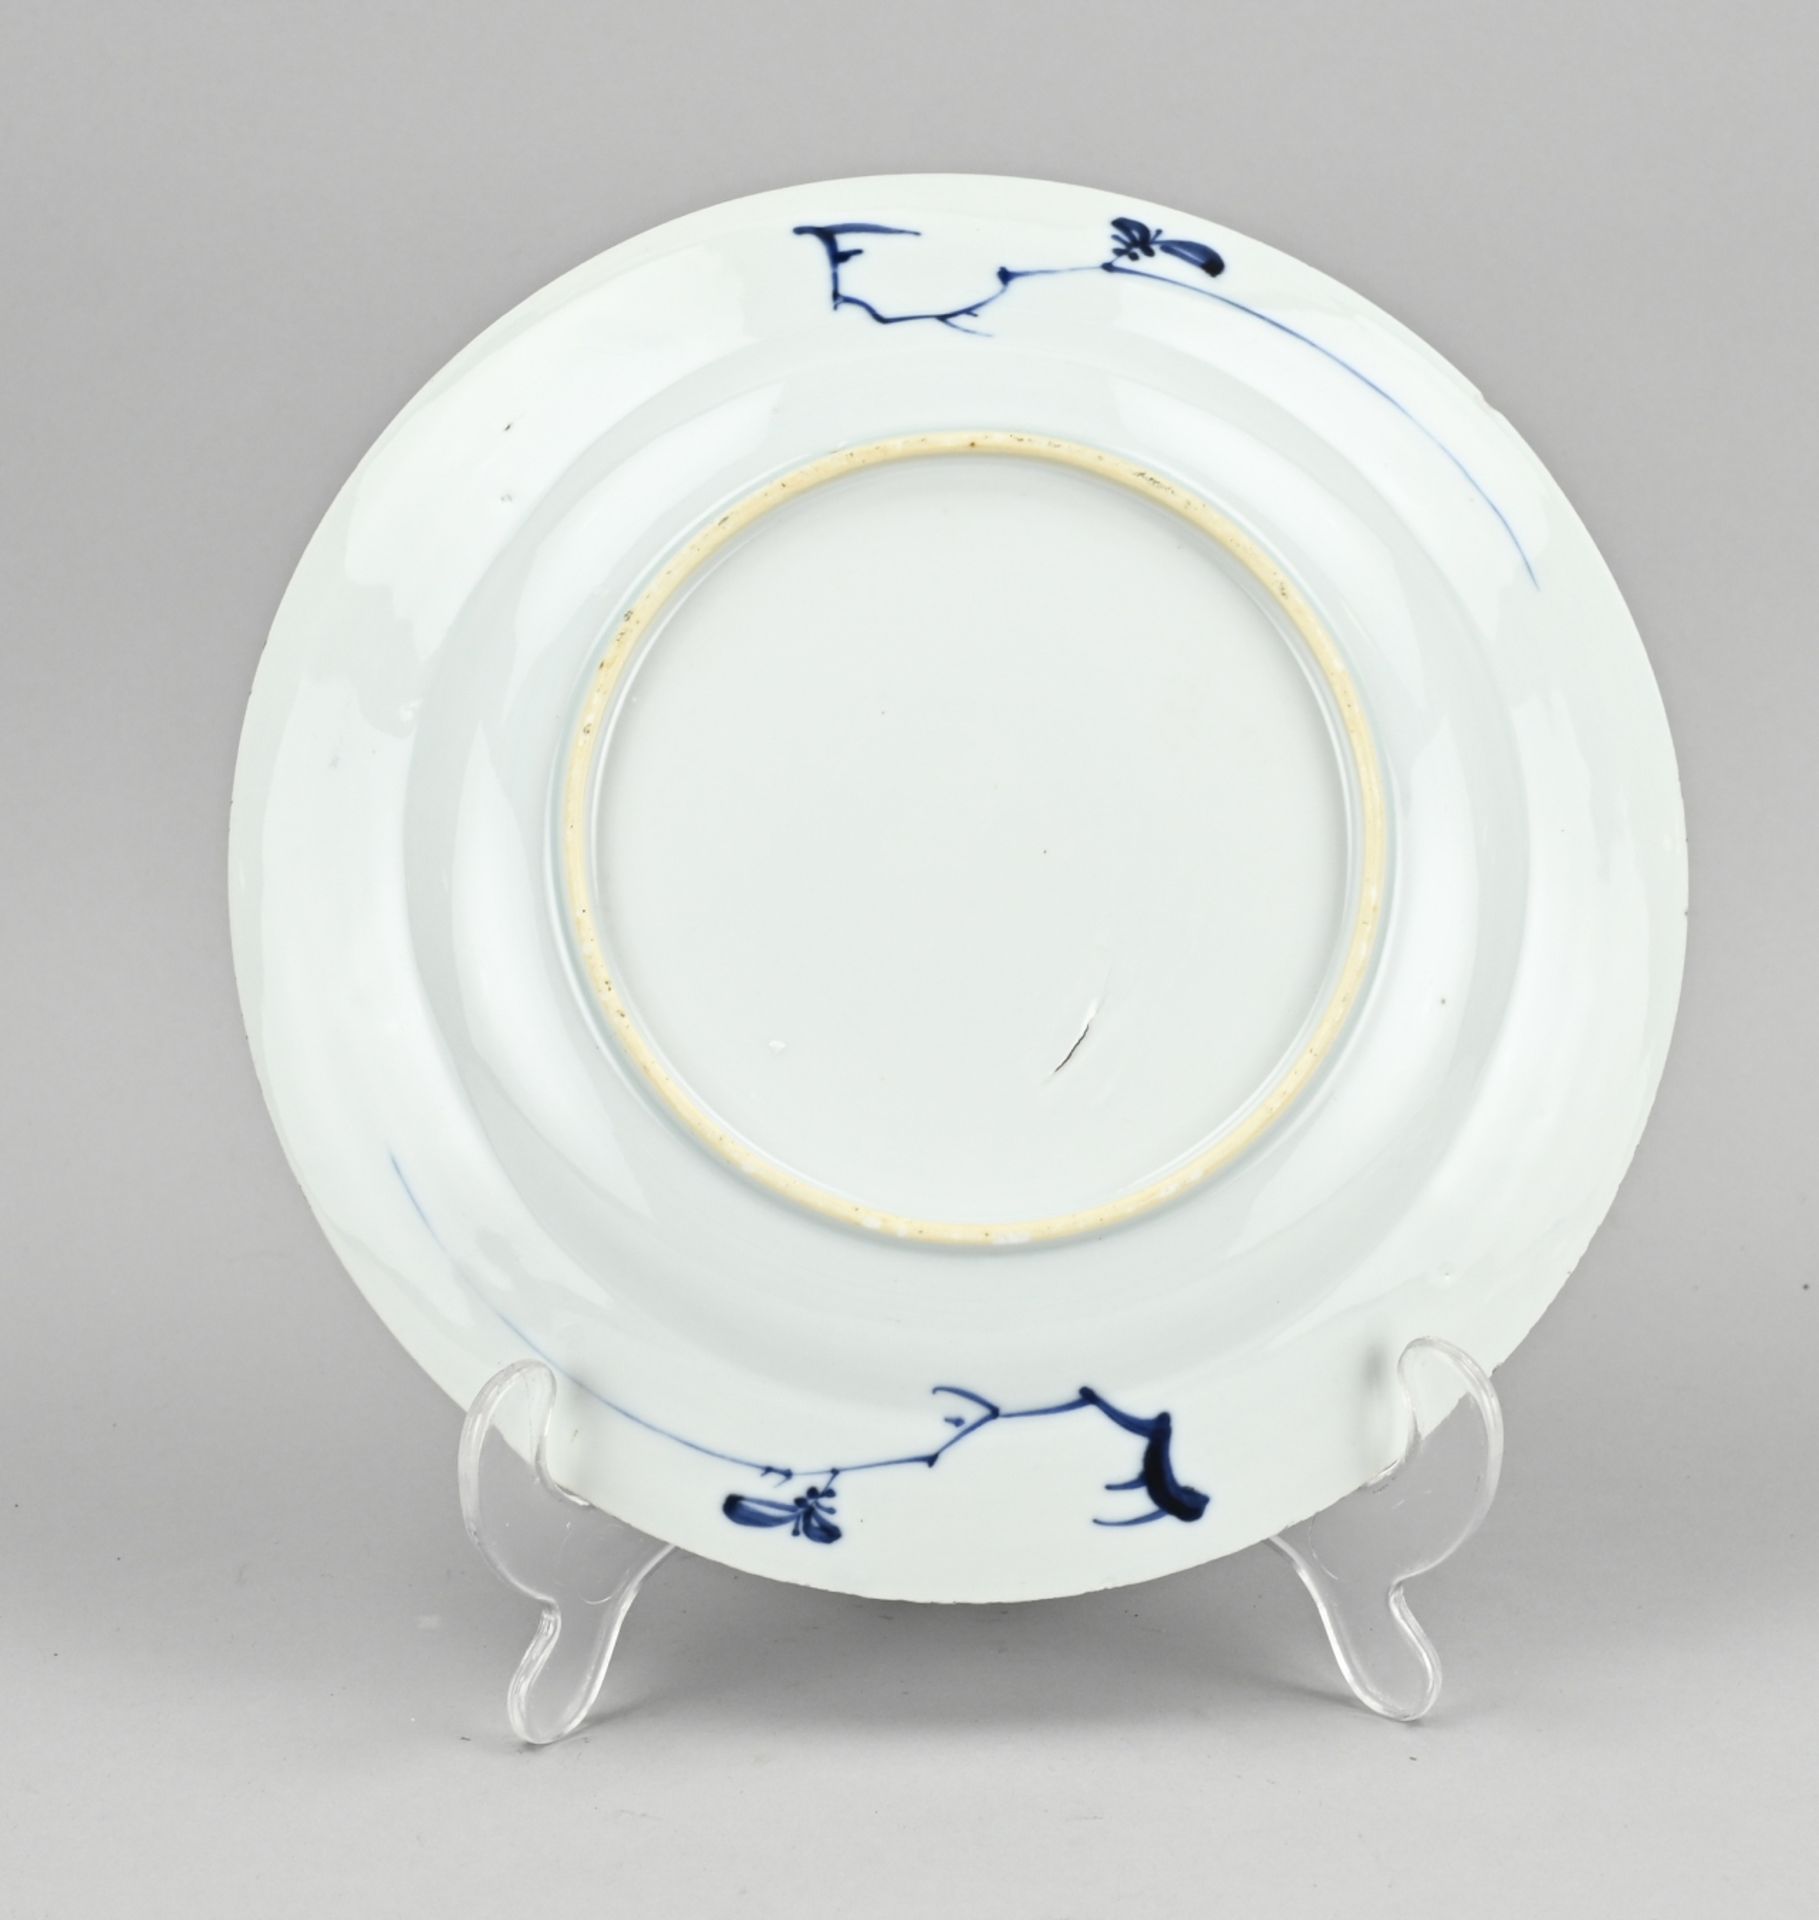 Chinese plate Ã˜ 22.7 cm. - Image 2 of 2